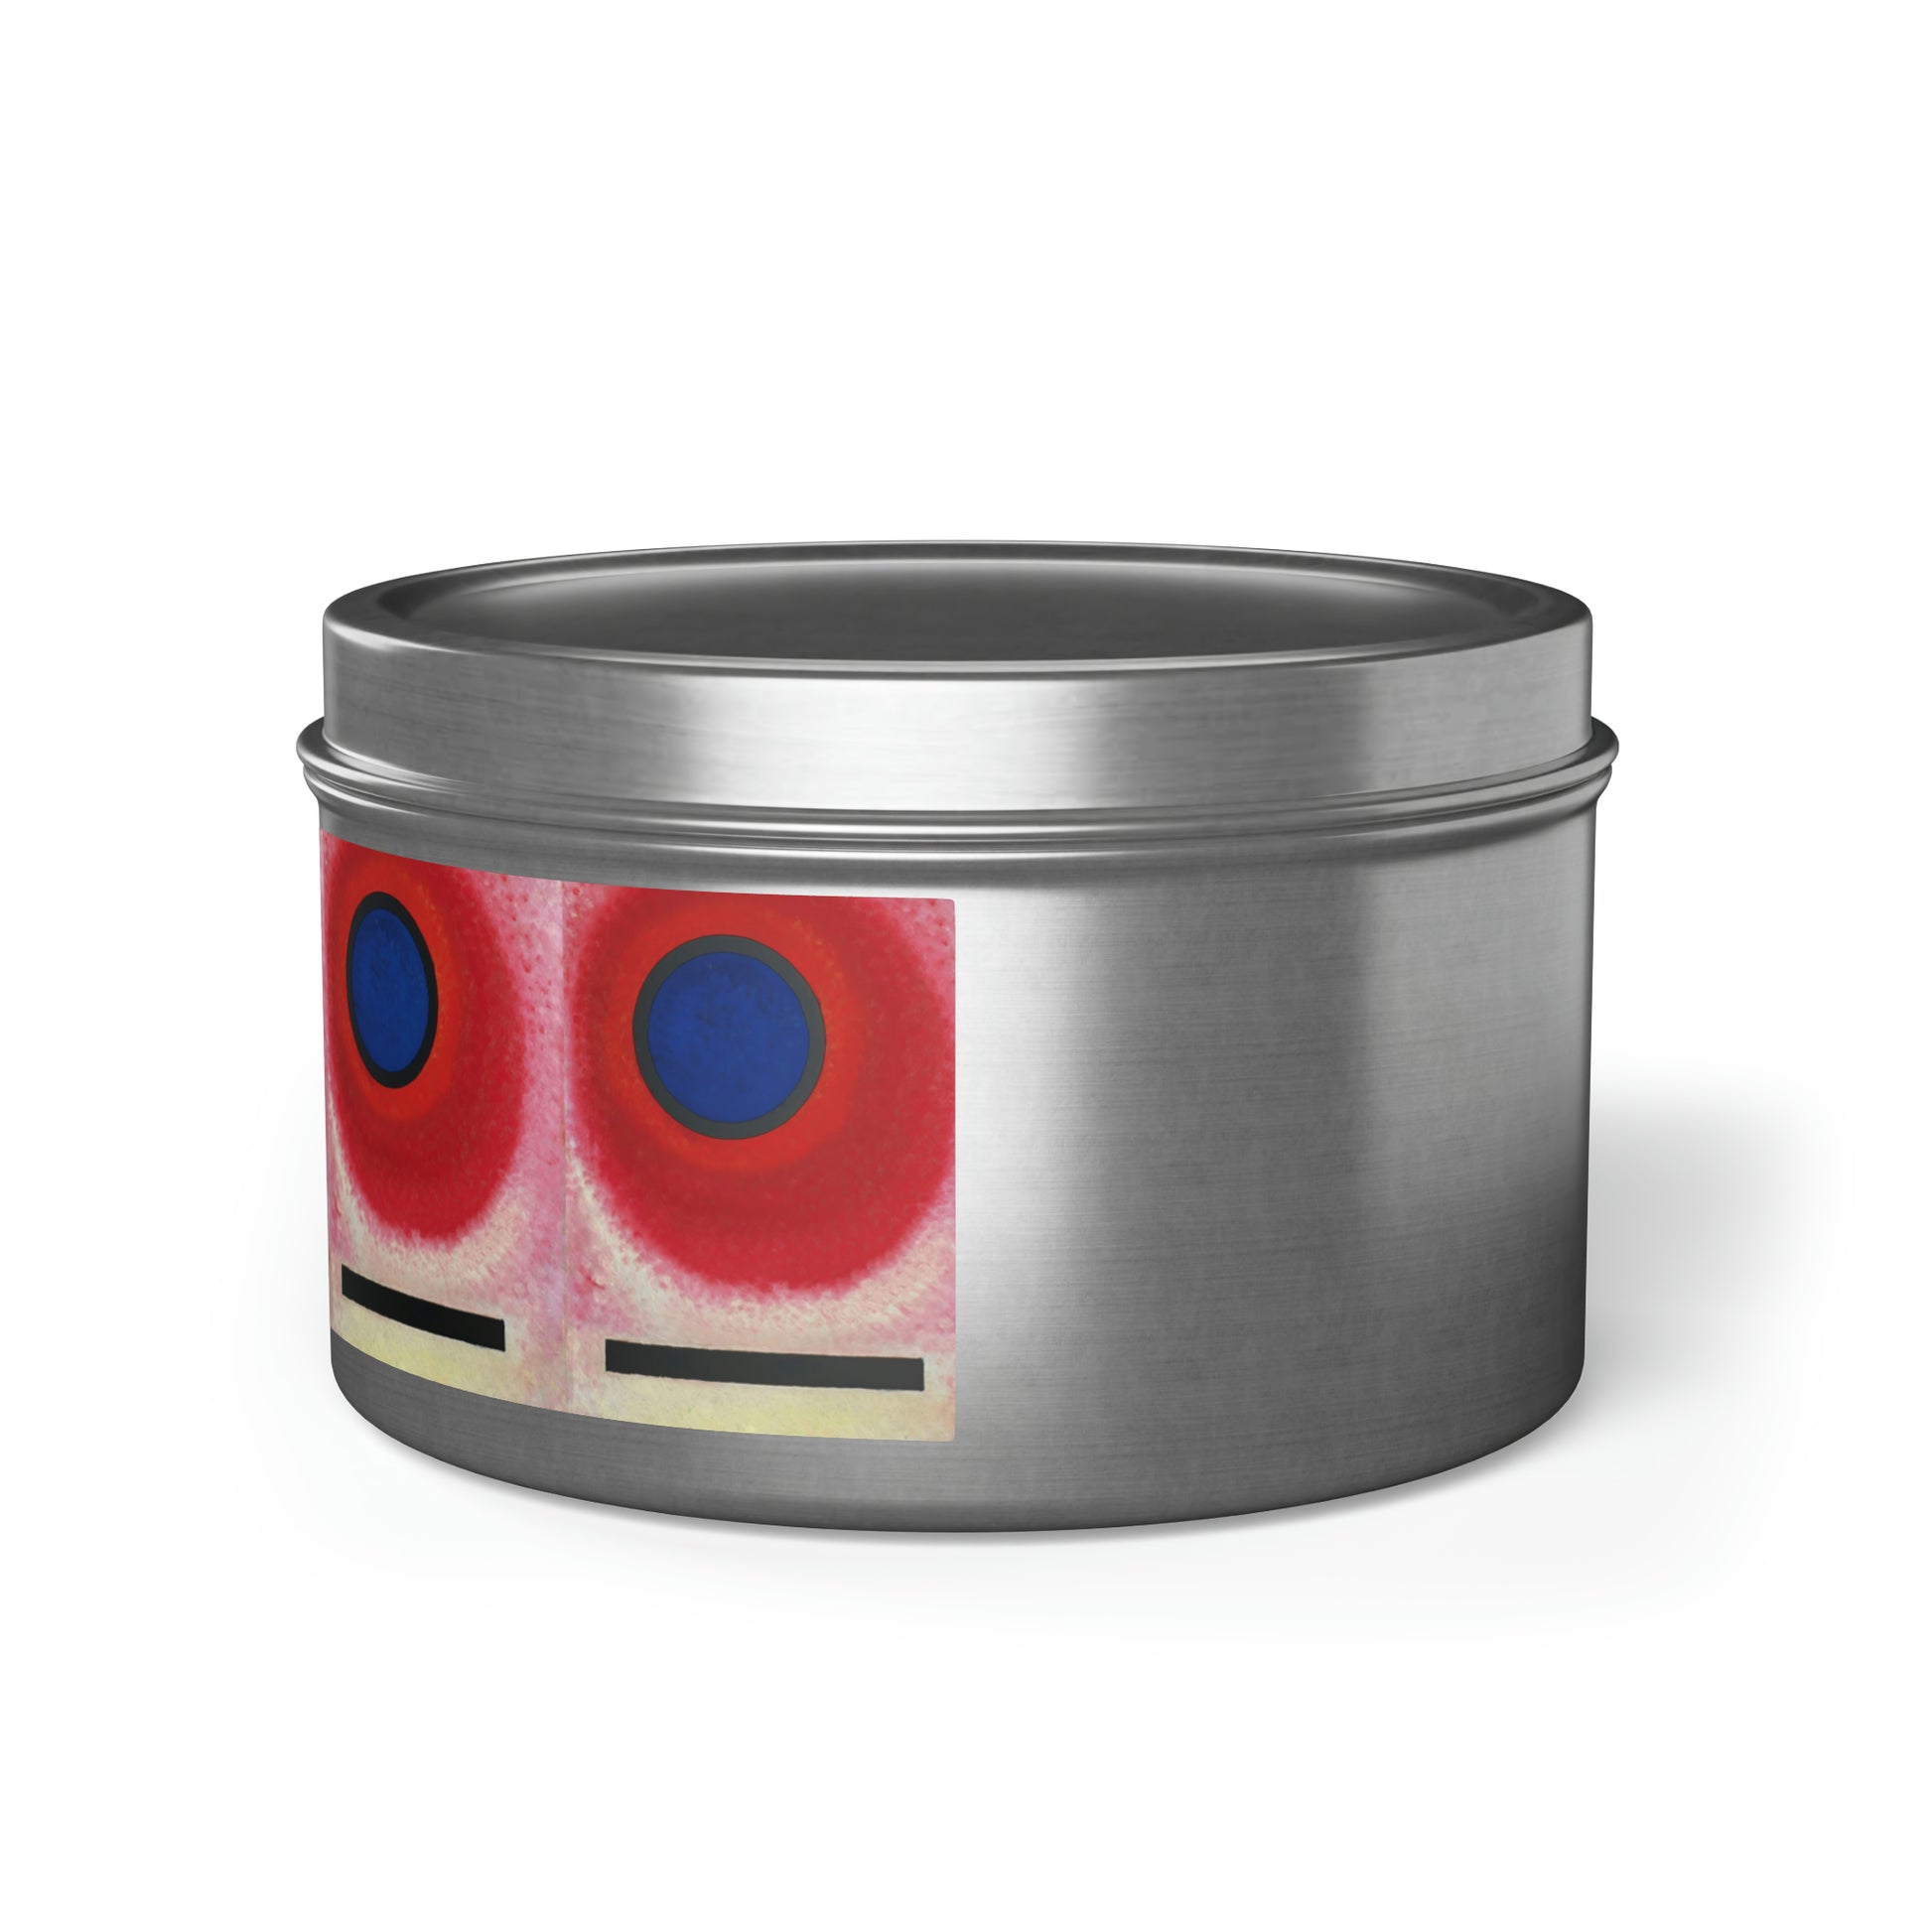 a tin with a red and blue design on it